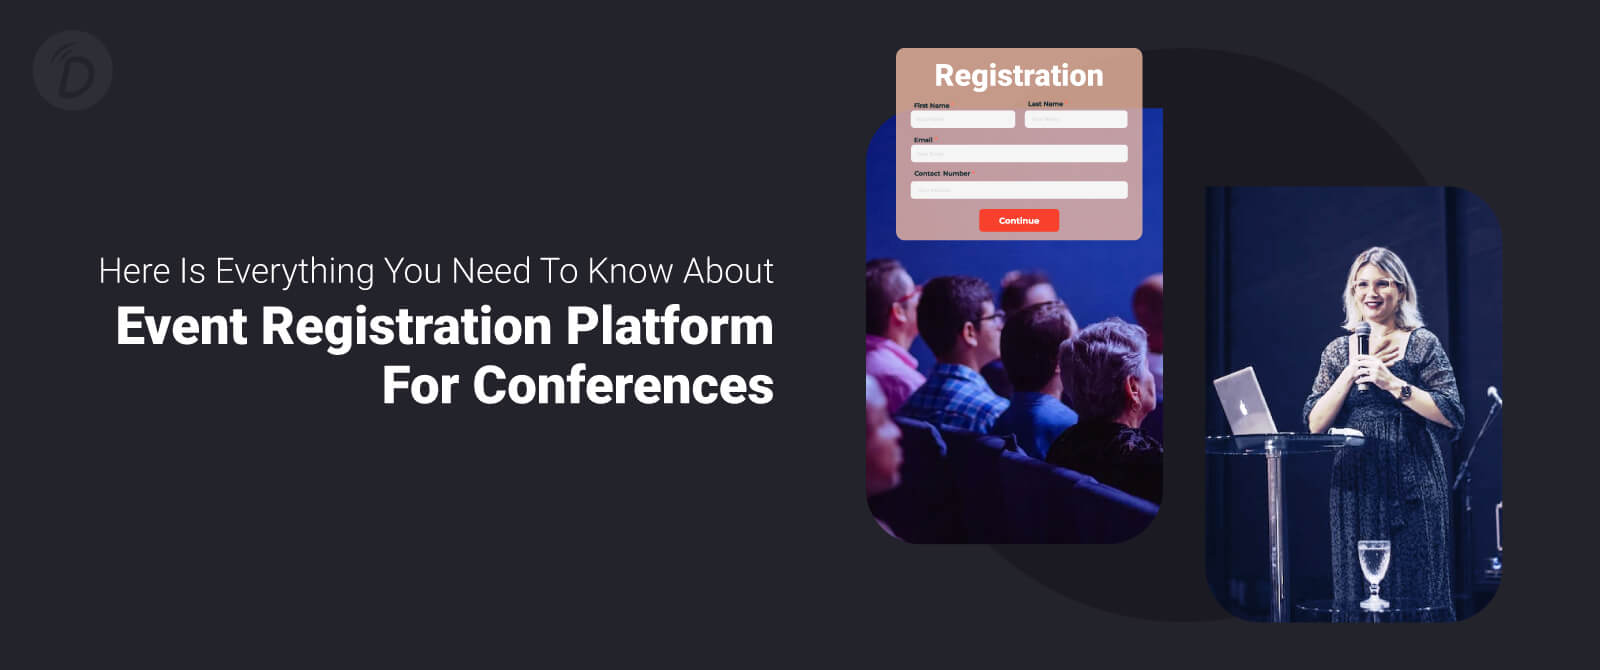 Here Is Everything You Need To Know About Event Registration Platform For Conferences